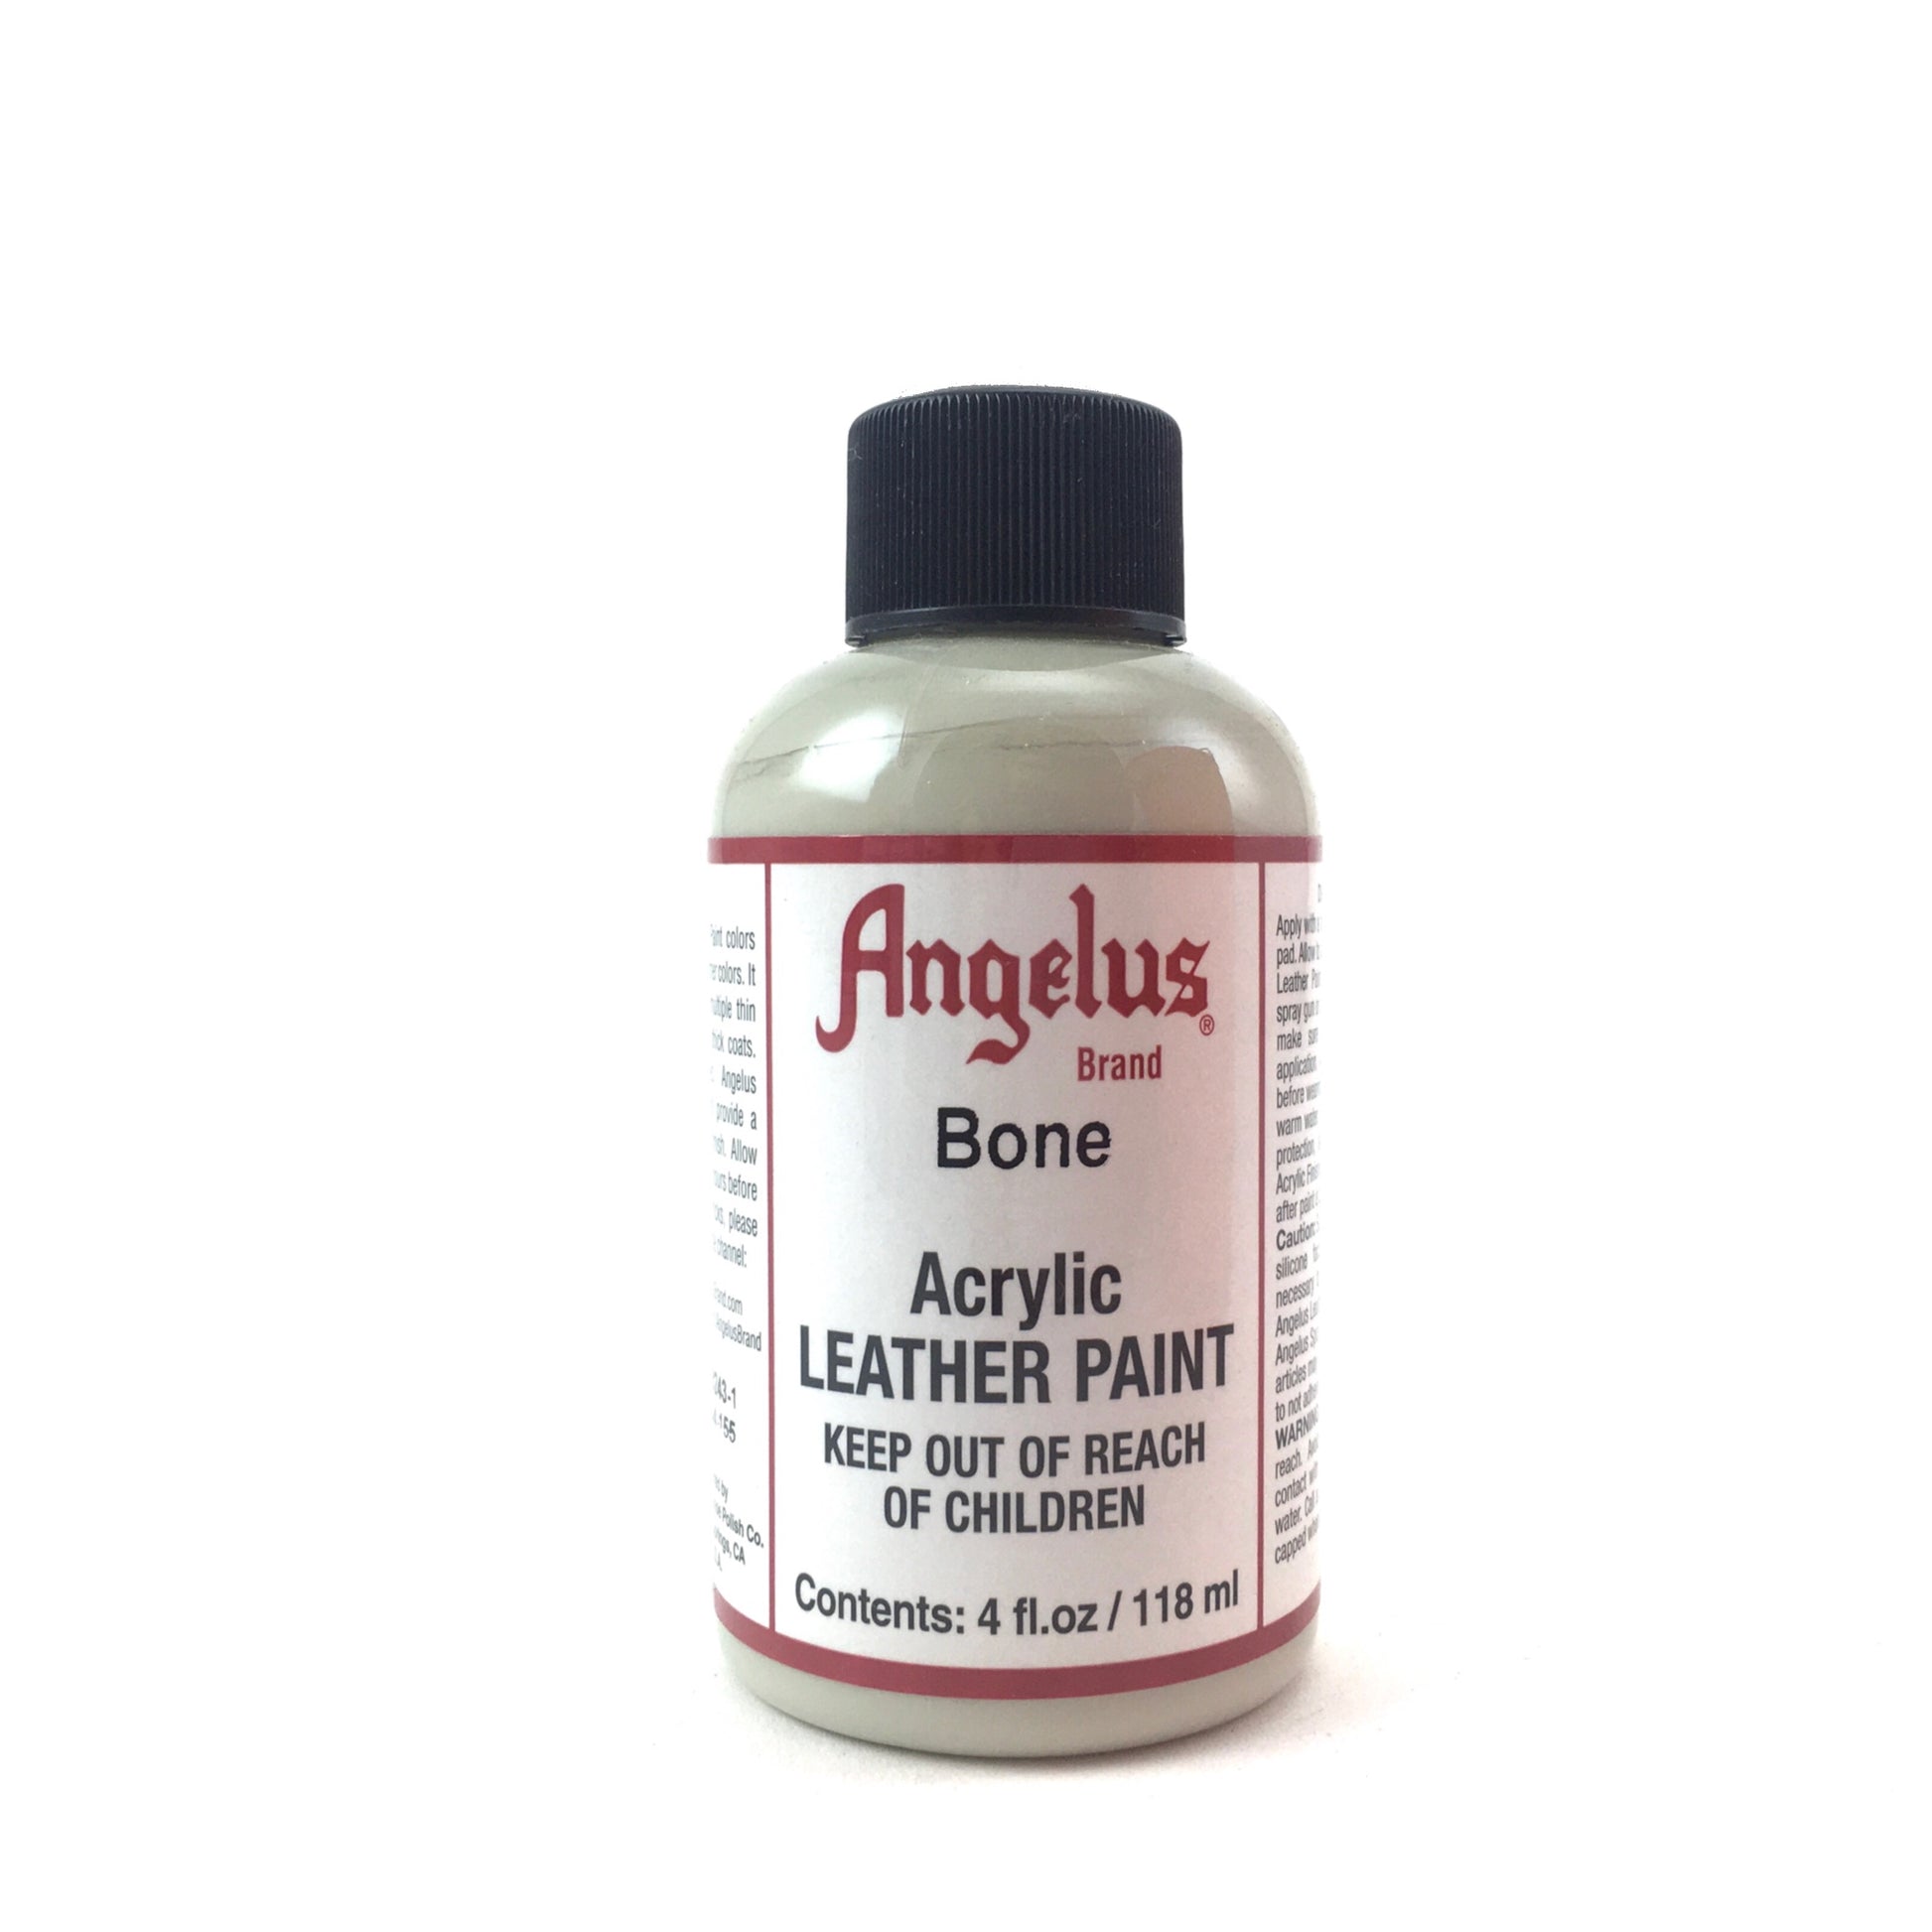 ANGELUS PROFESSIONAL LEATHER PREPARER AND DEGLAZER 5 oz MADE IN